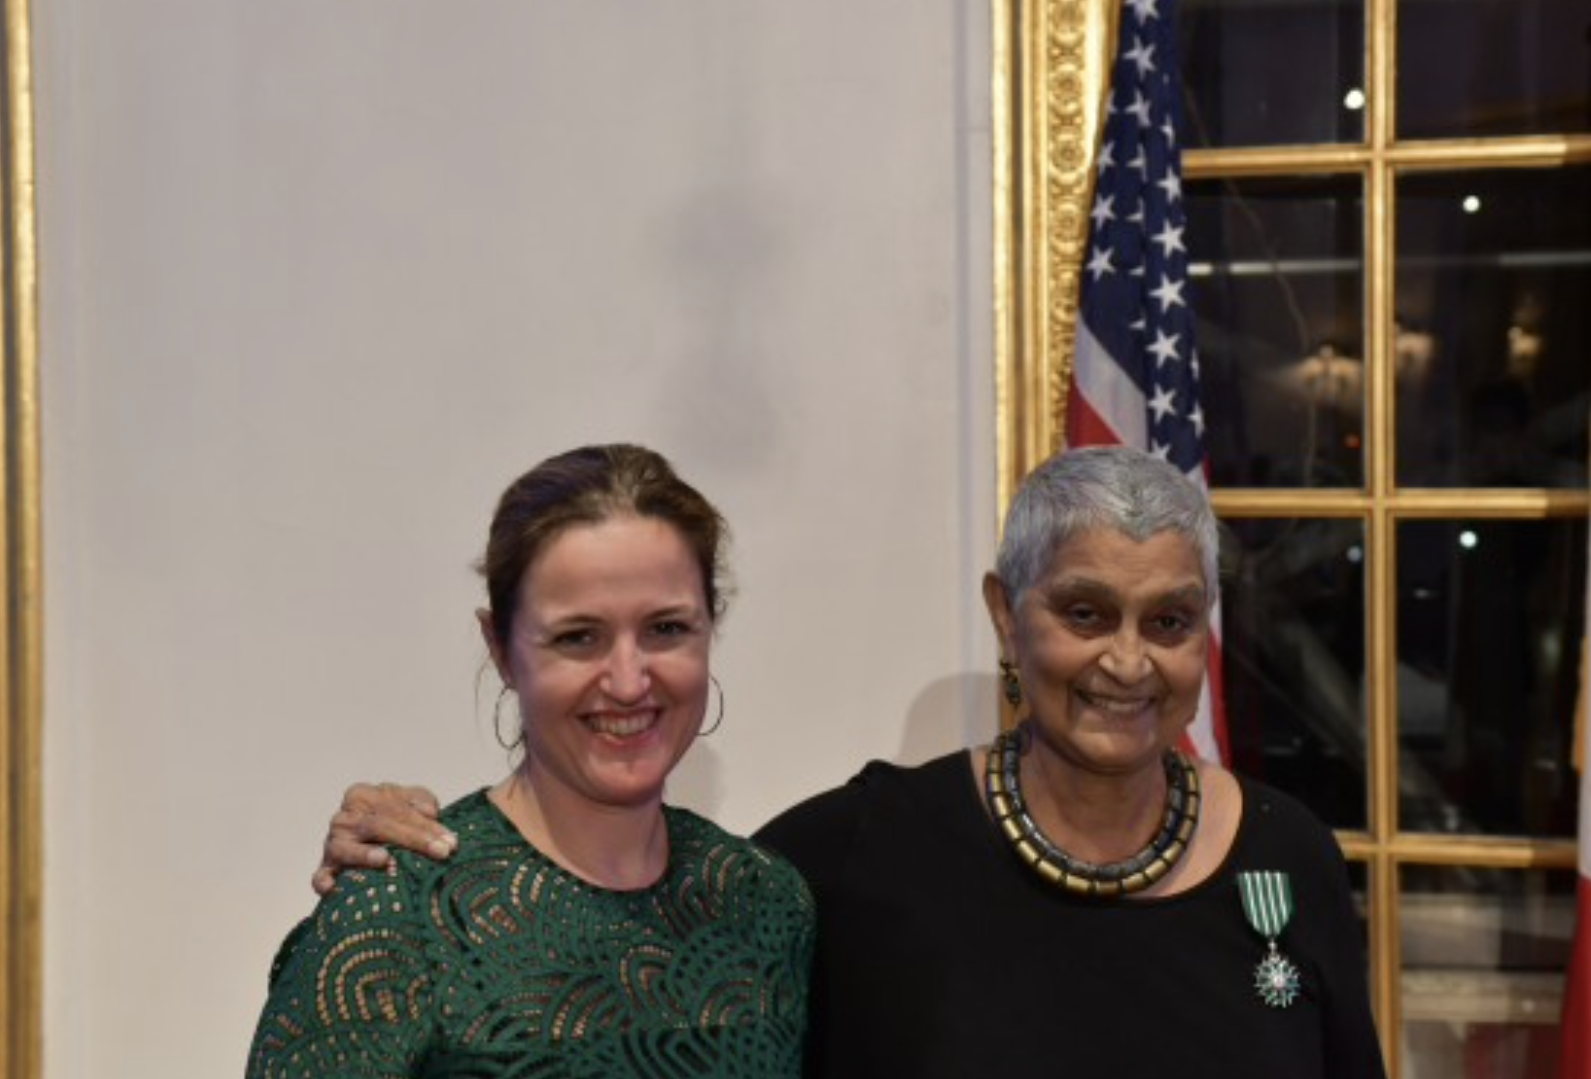 Gayatri Spivak to Receive Insignia of Chevalier of the Order of Arts and Letters